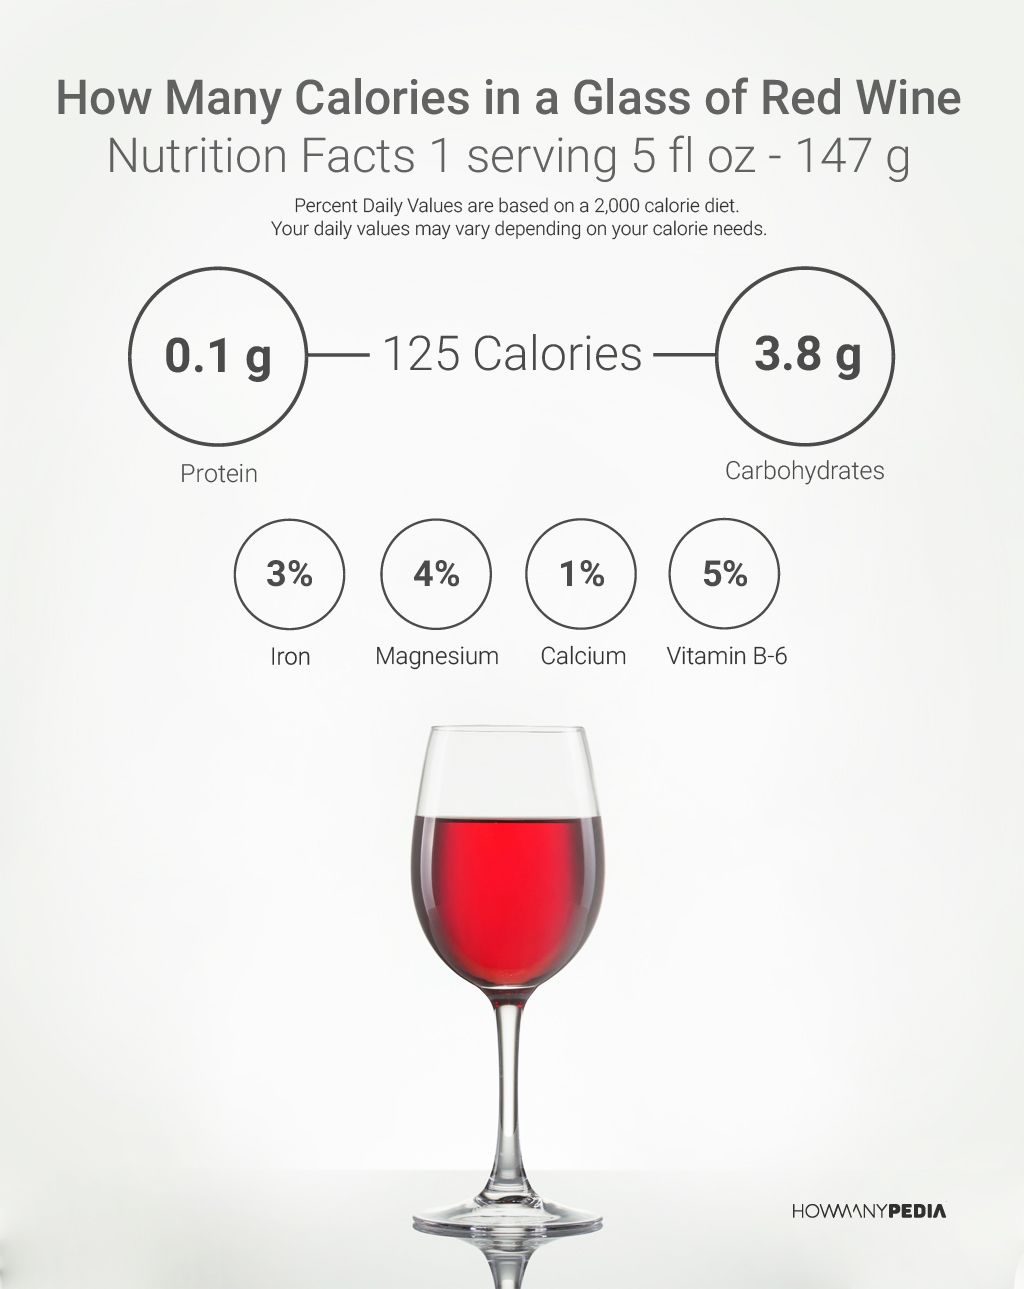 How Many Calories in a Glass of Red Wine